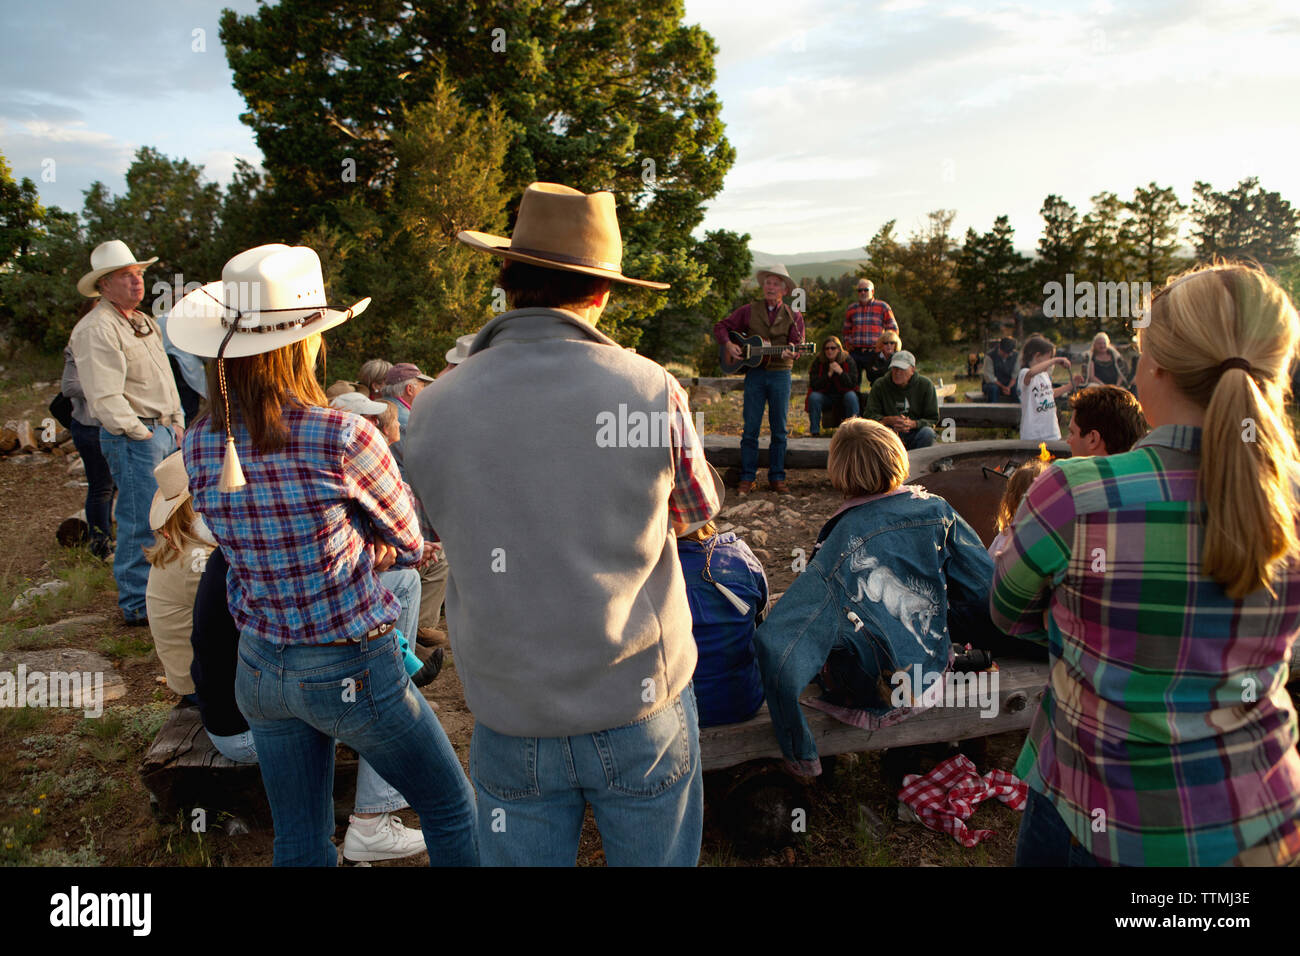 USA, Wyoming, Encampment, guests at a dude ranch sit around a campfire and listen to a man play the guitar and sing country western songs, Abara Ranch Stock Photo